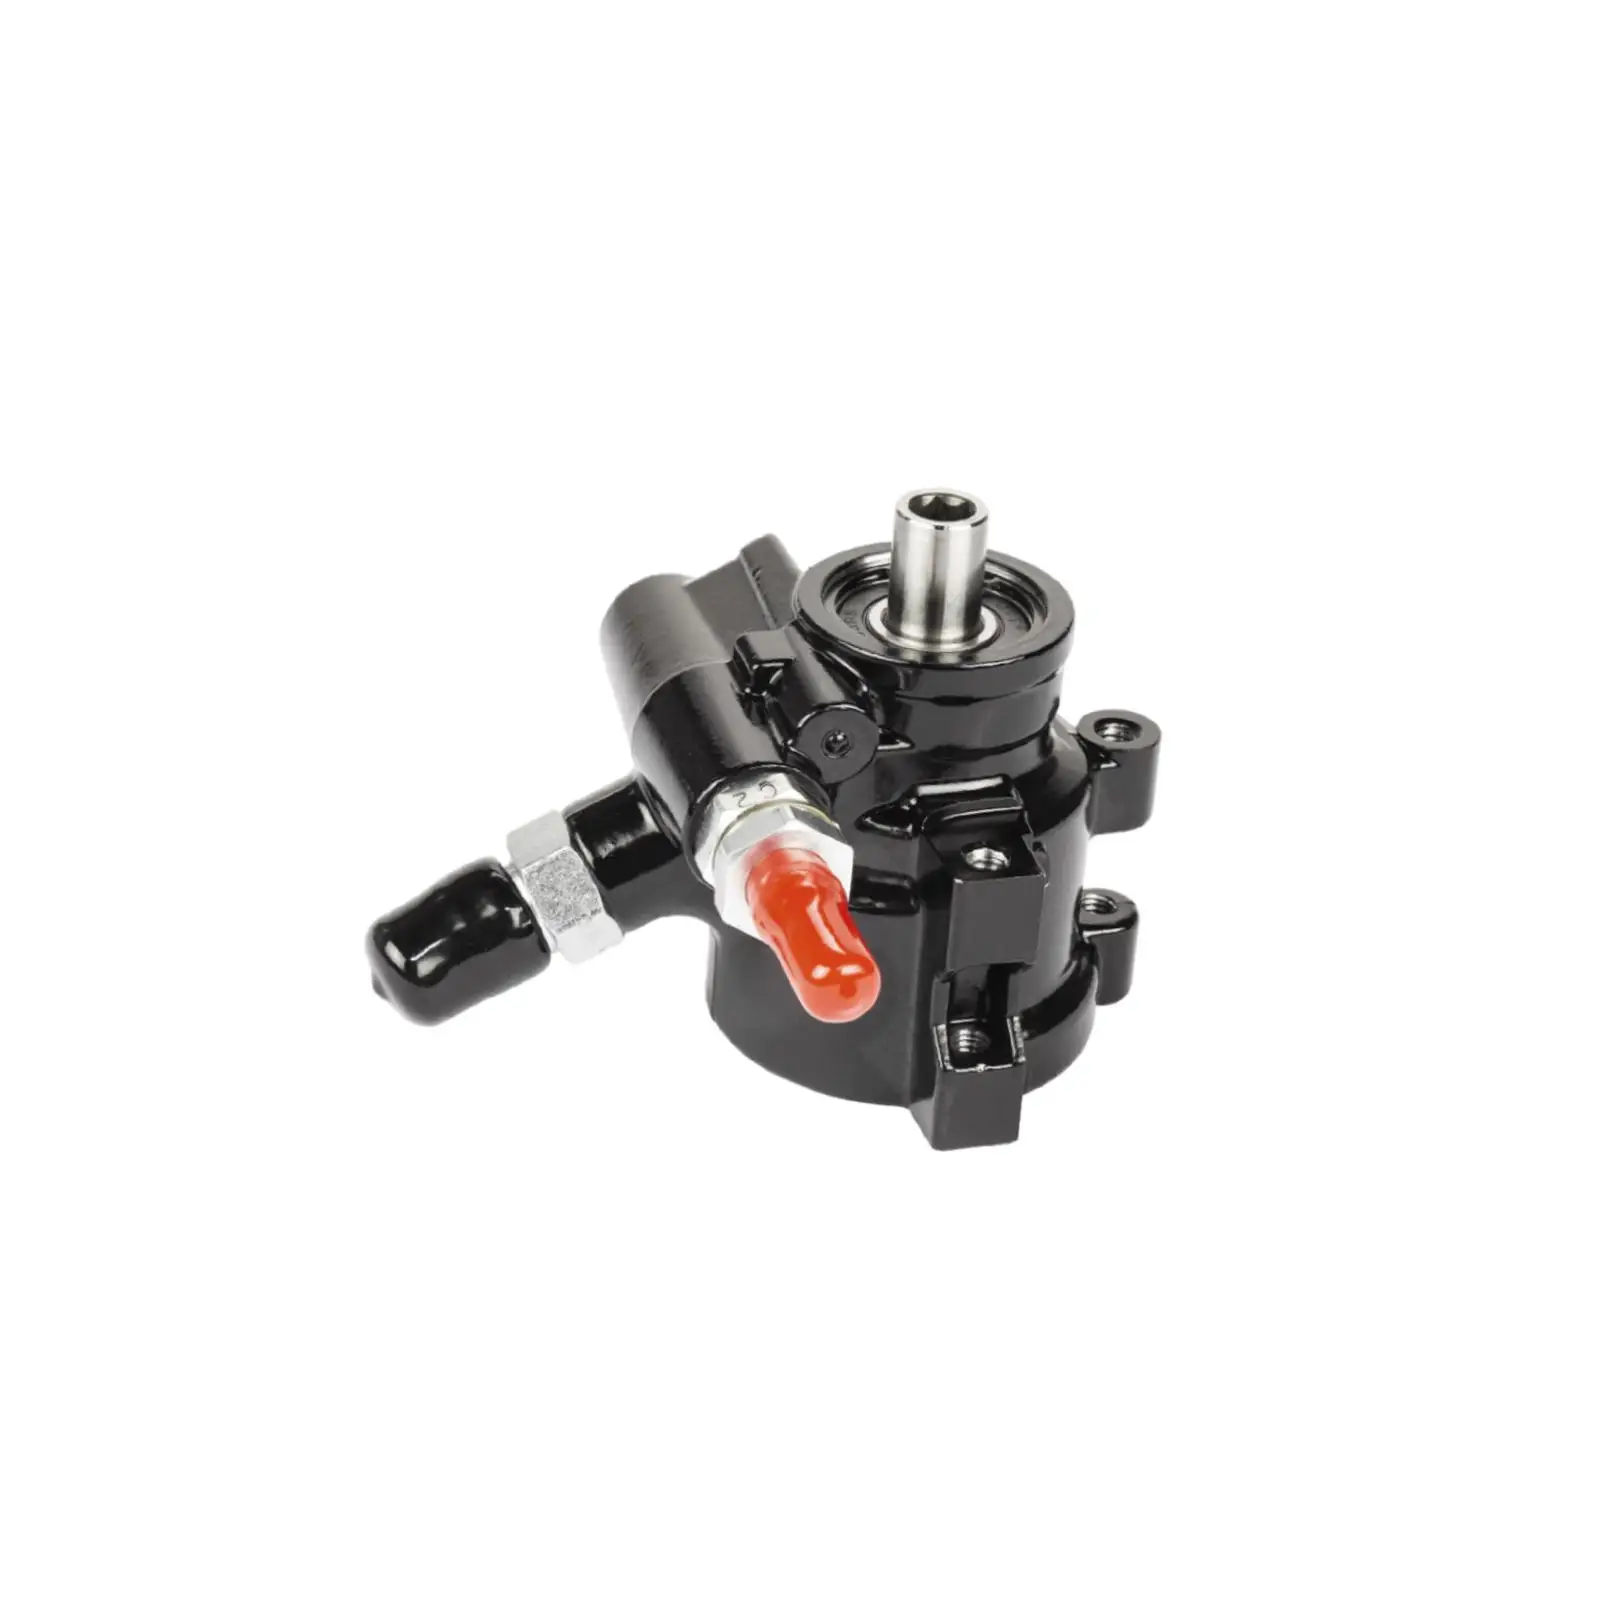 Power Steering Pump 172.1009 Car Accessories for Saginaw TC Type 2 Repair Part Sturdy Professional Easy to Install